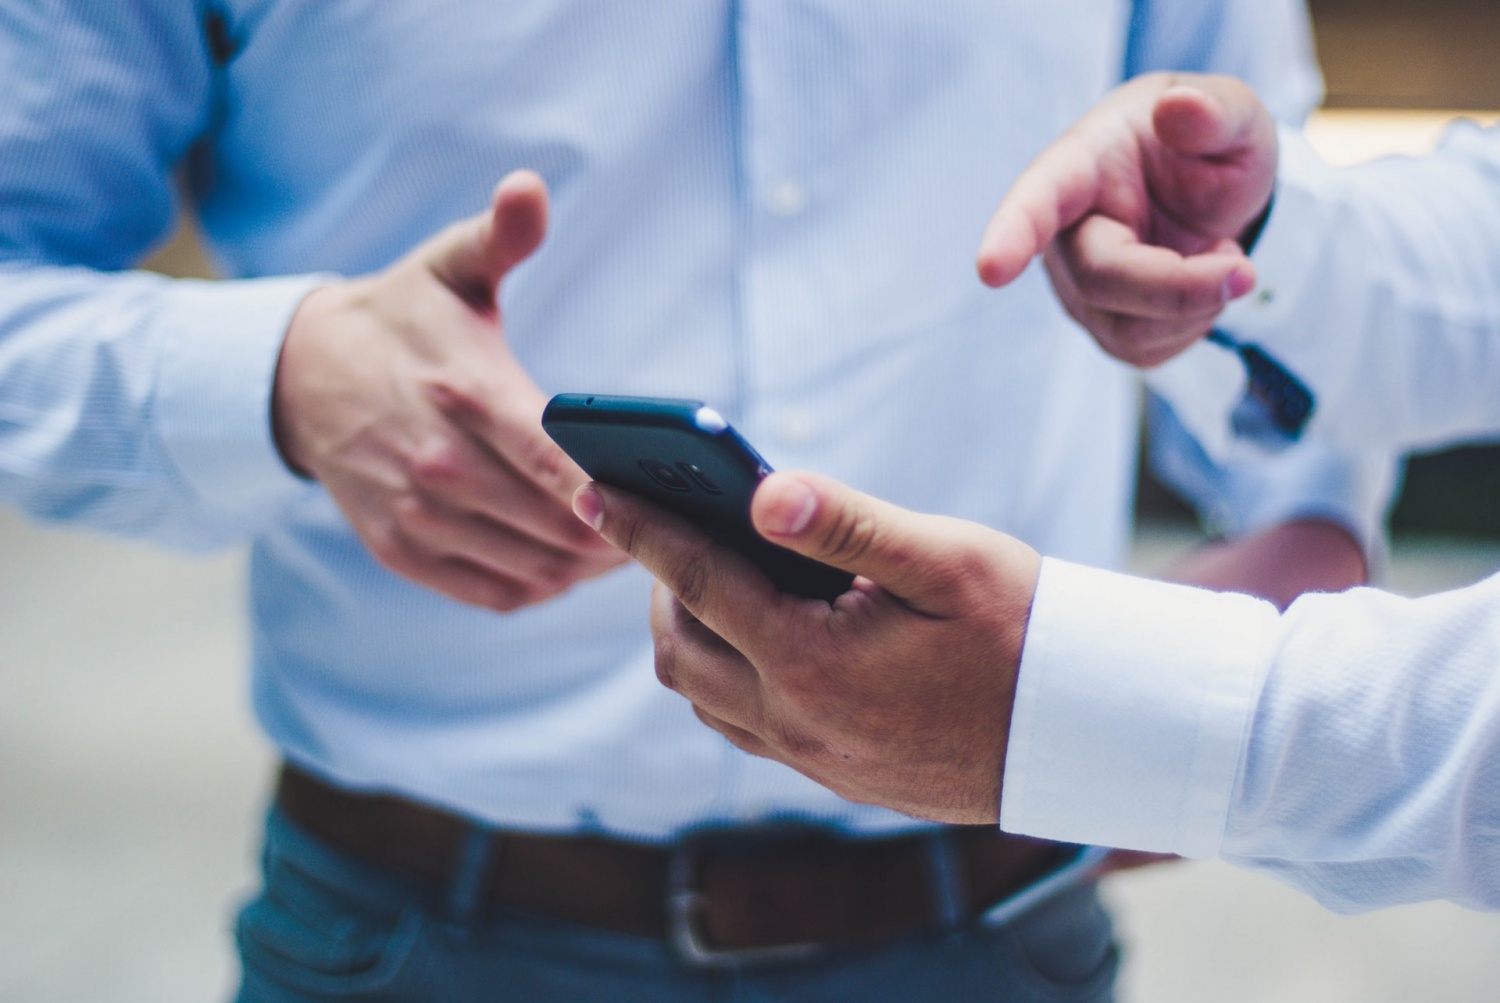 Why are Mobile Web Apps a Smart Choice for Businesses?